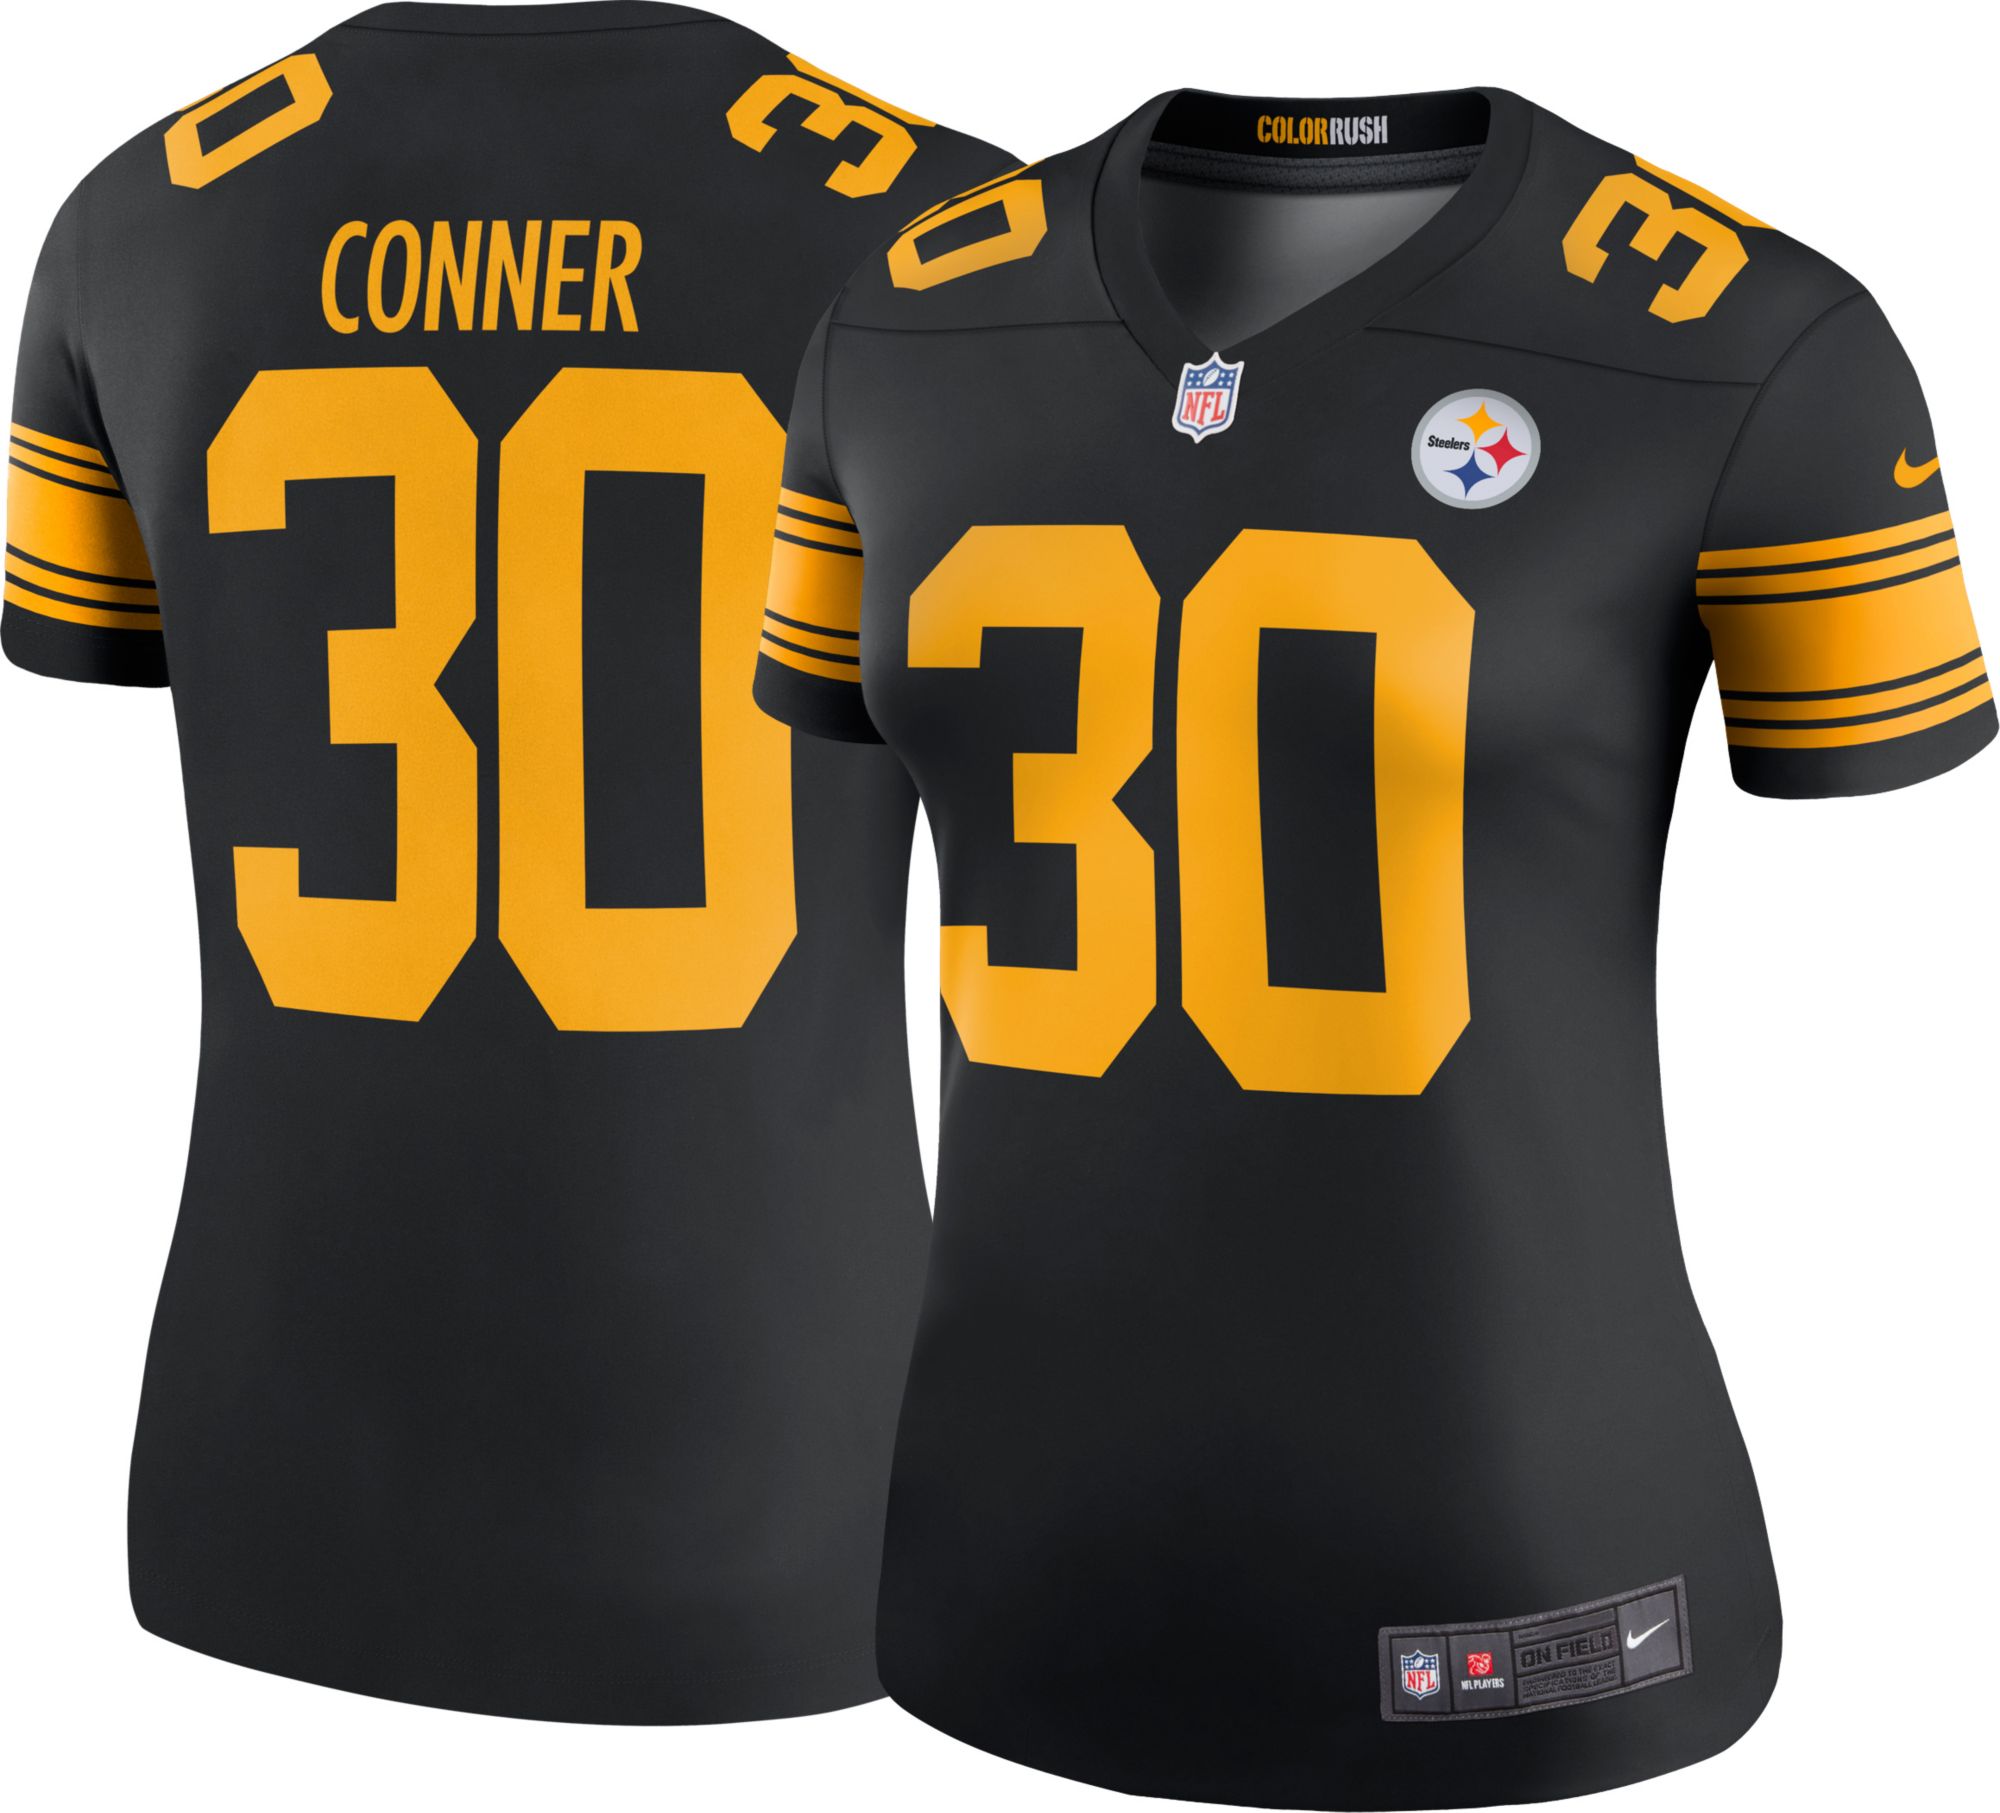 steelers jersey conner